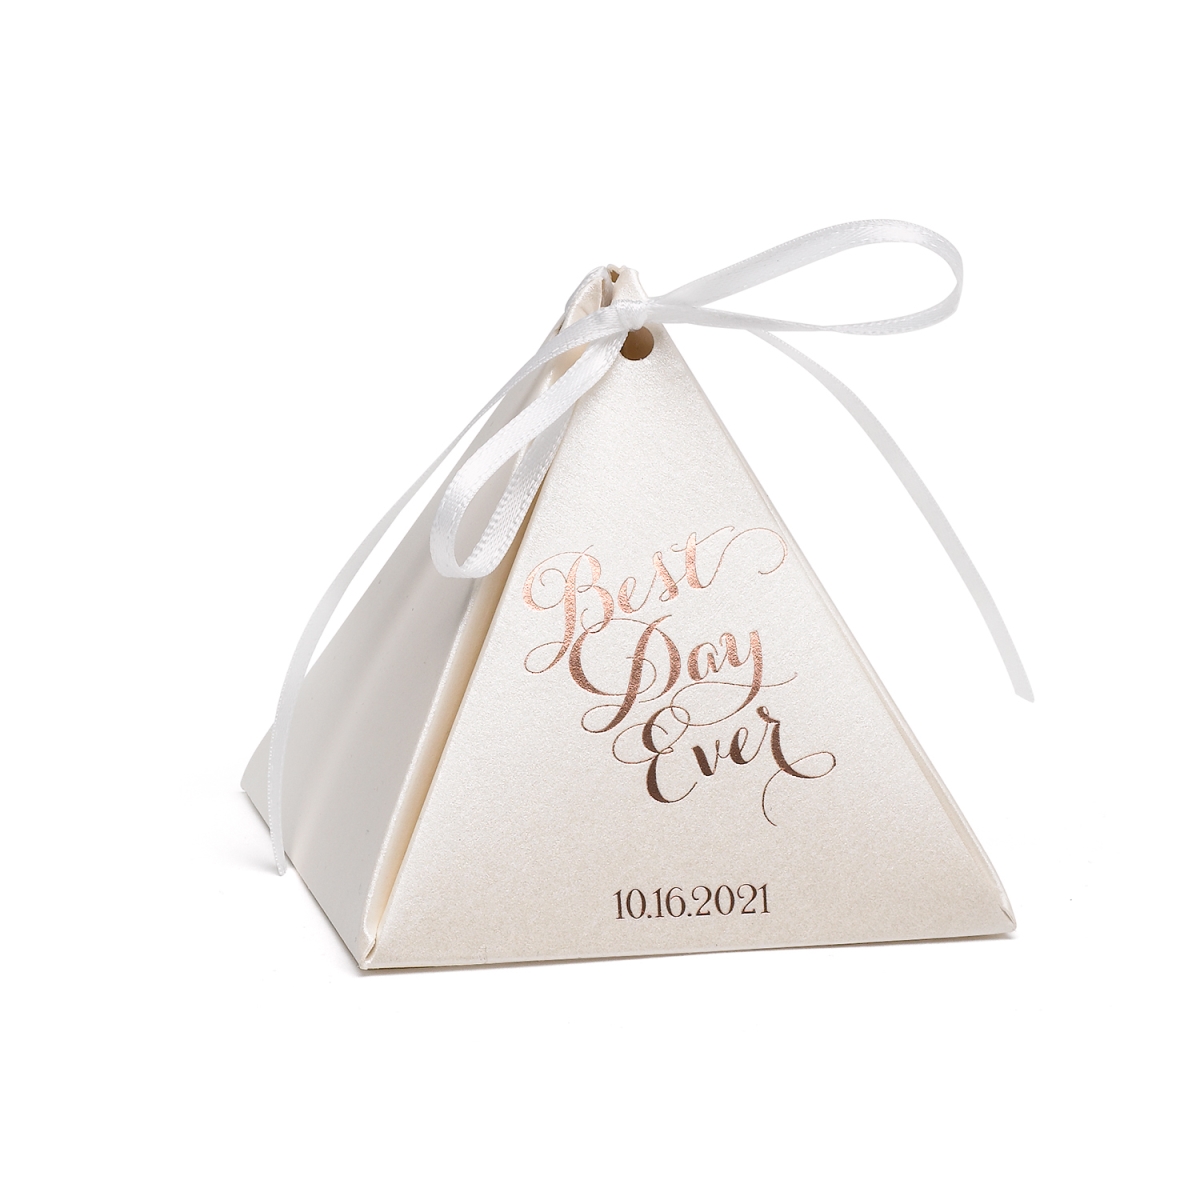 Picture of Hortense B. Hewitt 54881P Pyramid Favor Box - Ecru Shimmer - Personalized